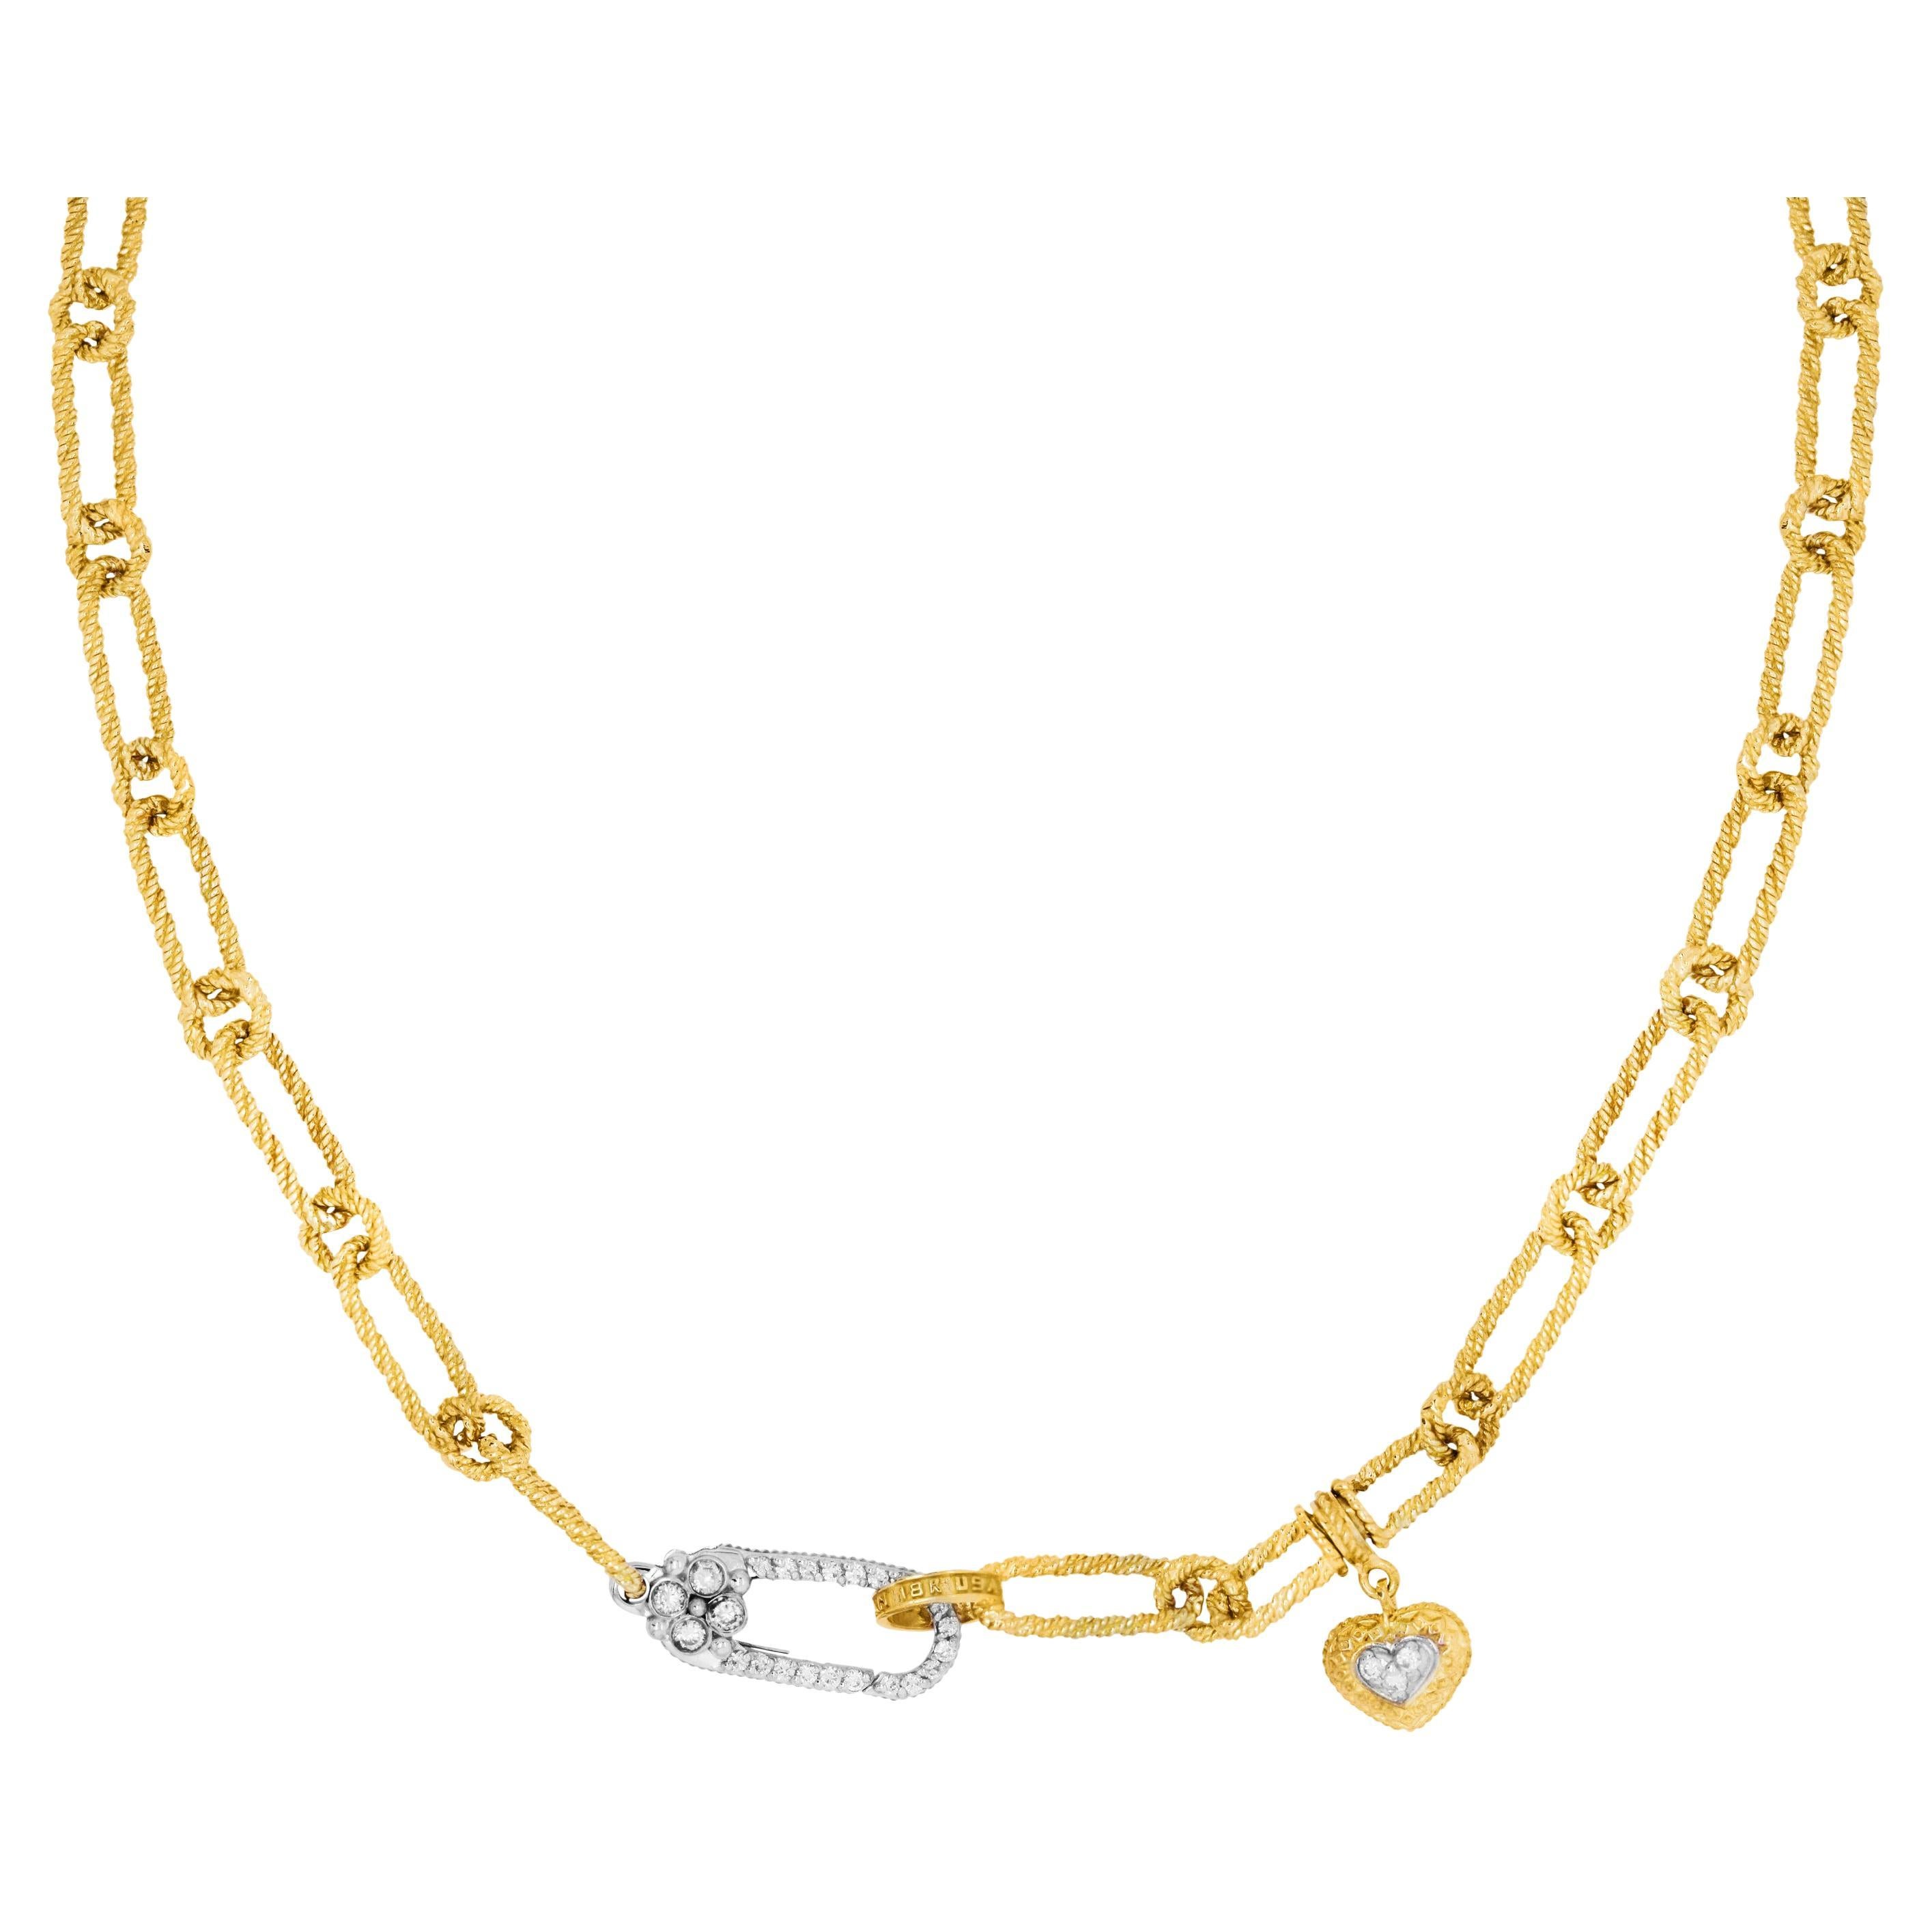 Stambolian 18K Yellow White Gold Diamonds Dangling Heart Oval Link Necklace